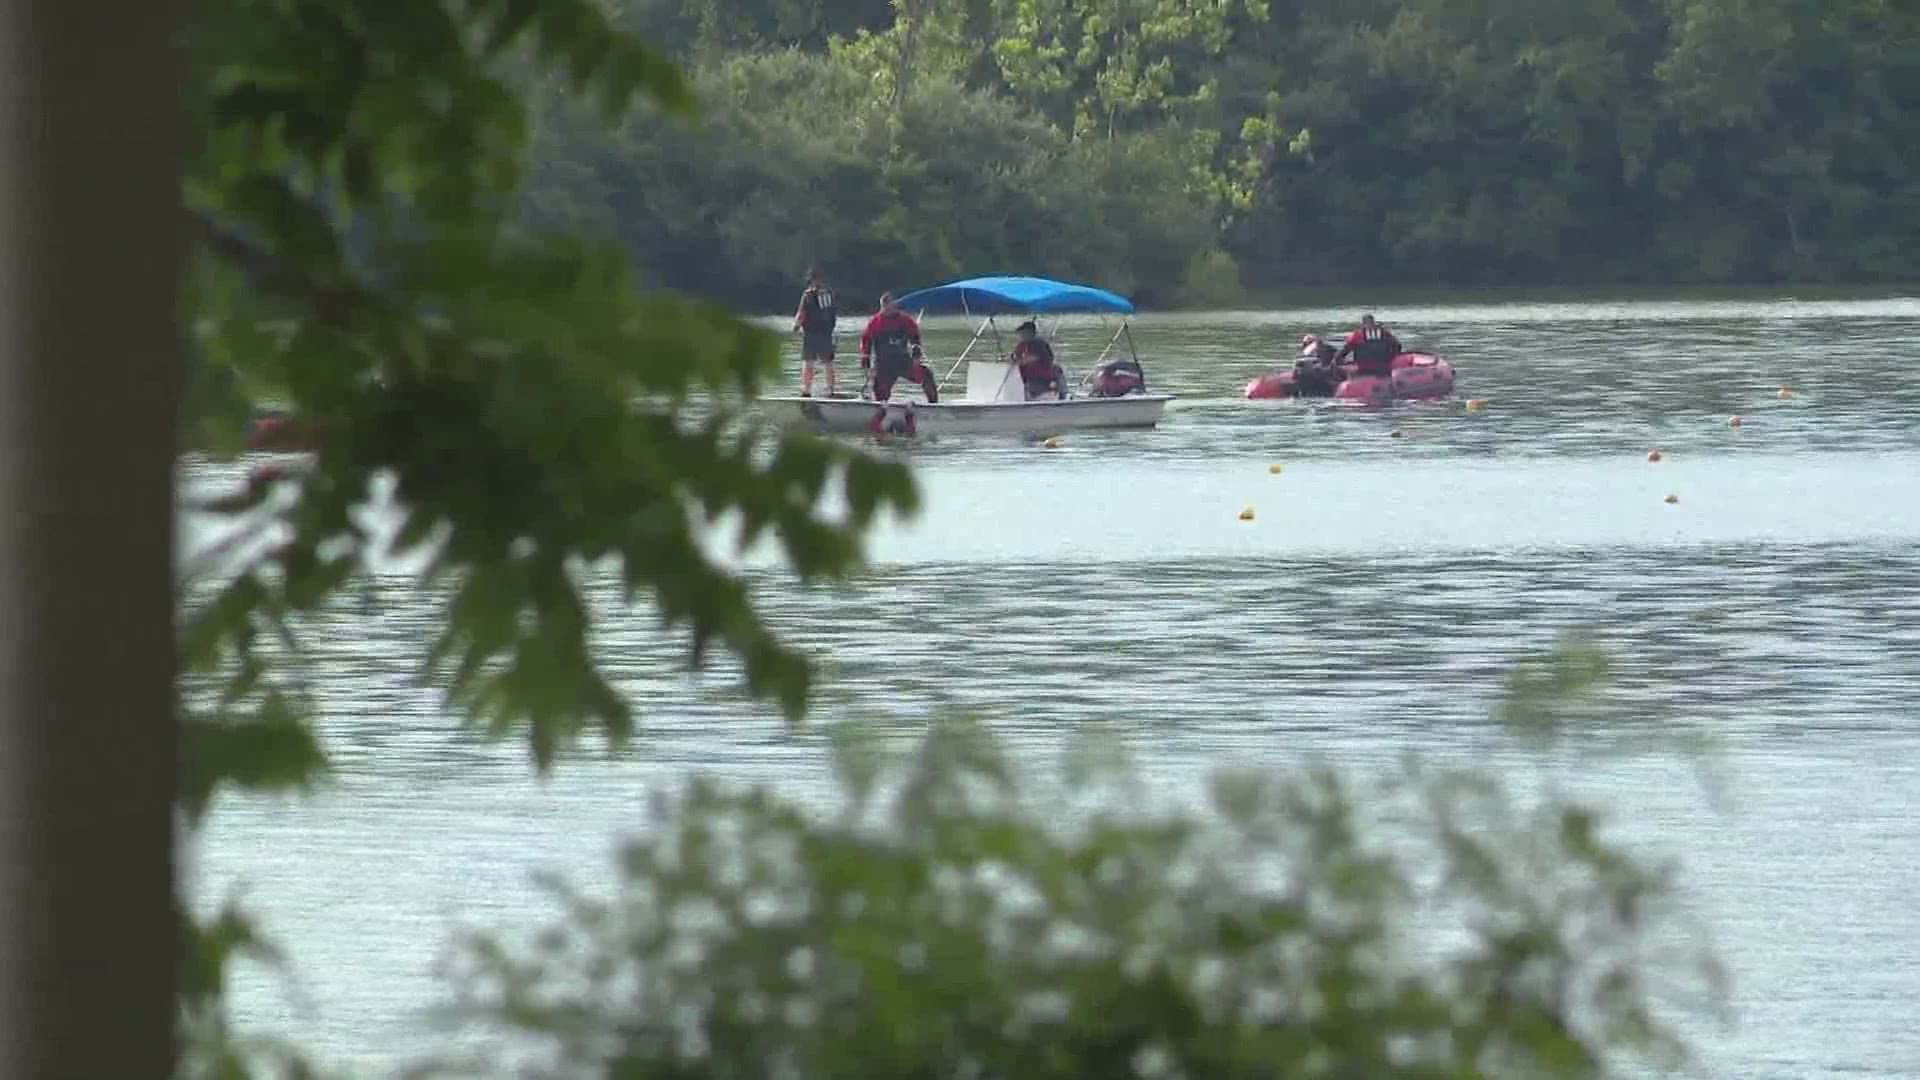 Fire officials say a man was reported missing in the water around 4 p.m. Wednesday